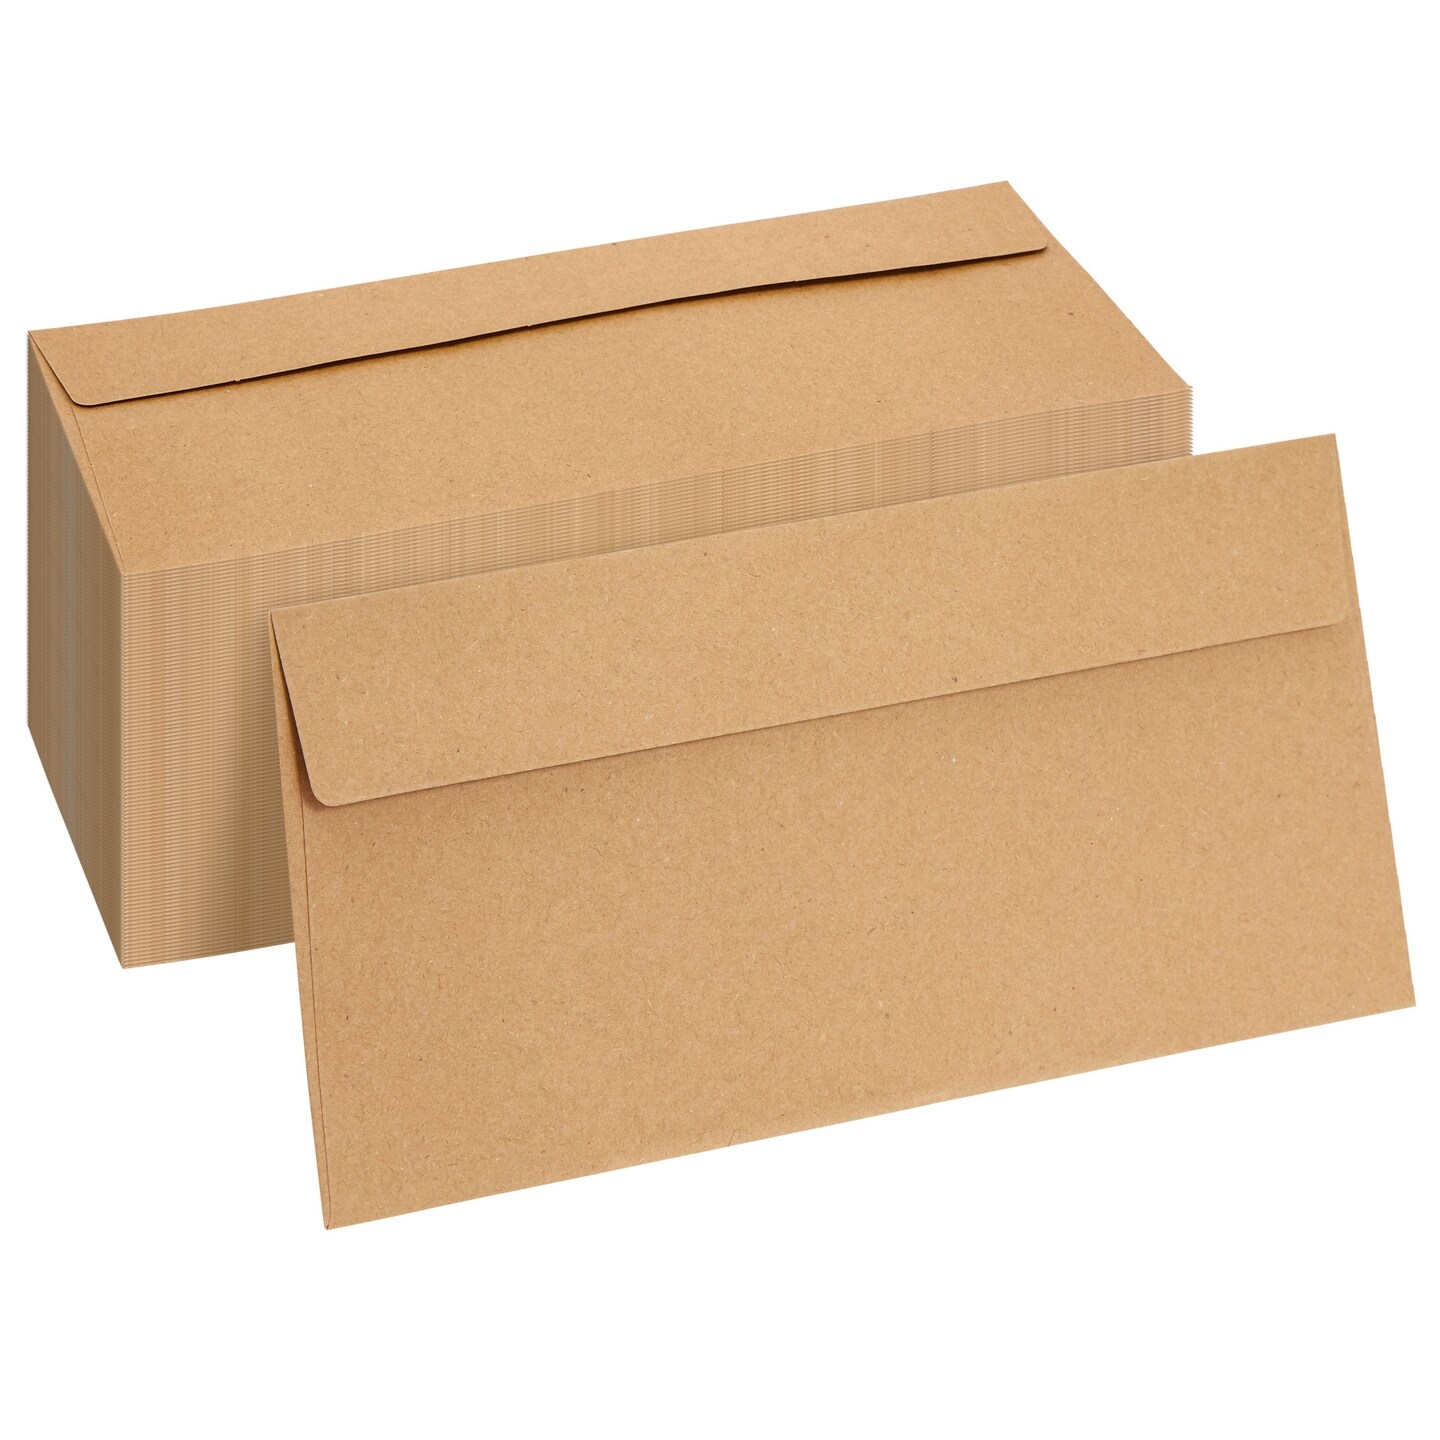 100 Pack Bulk #10 Brown Envelopes with Gummed Seal for Invitations, Mailing Letters, Checks, Gift Certificates (4-1/8 x 9-1/2 In)